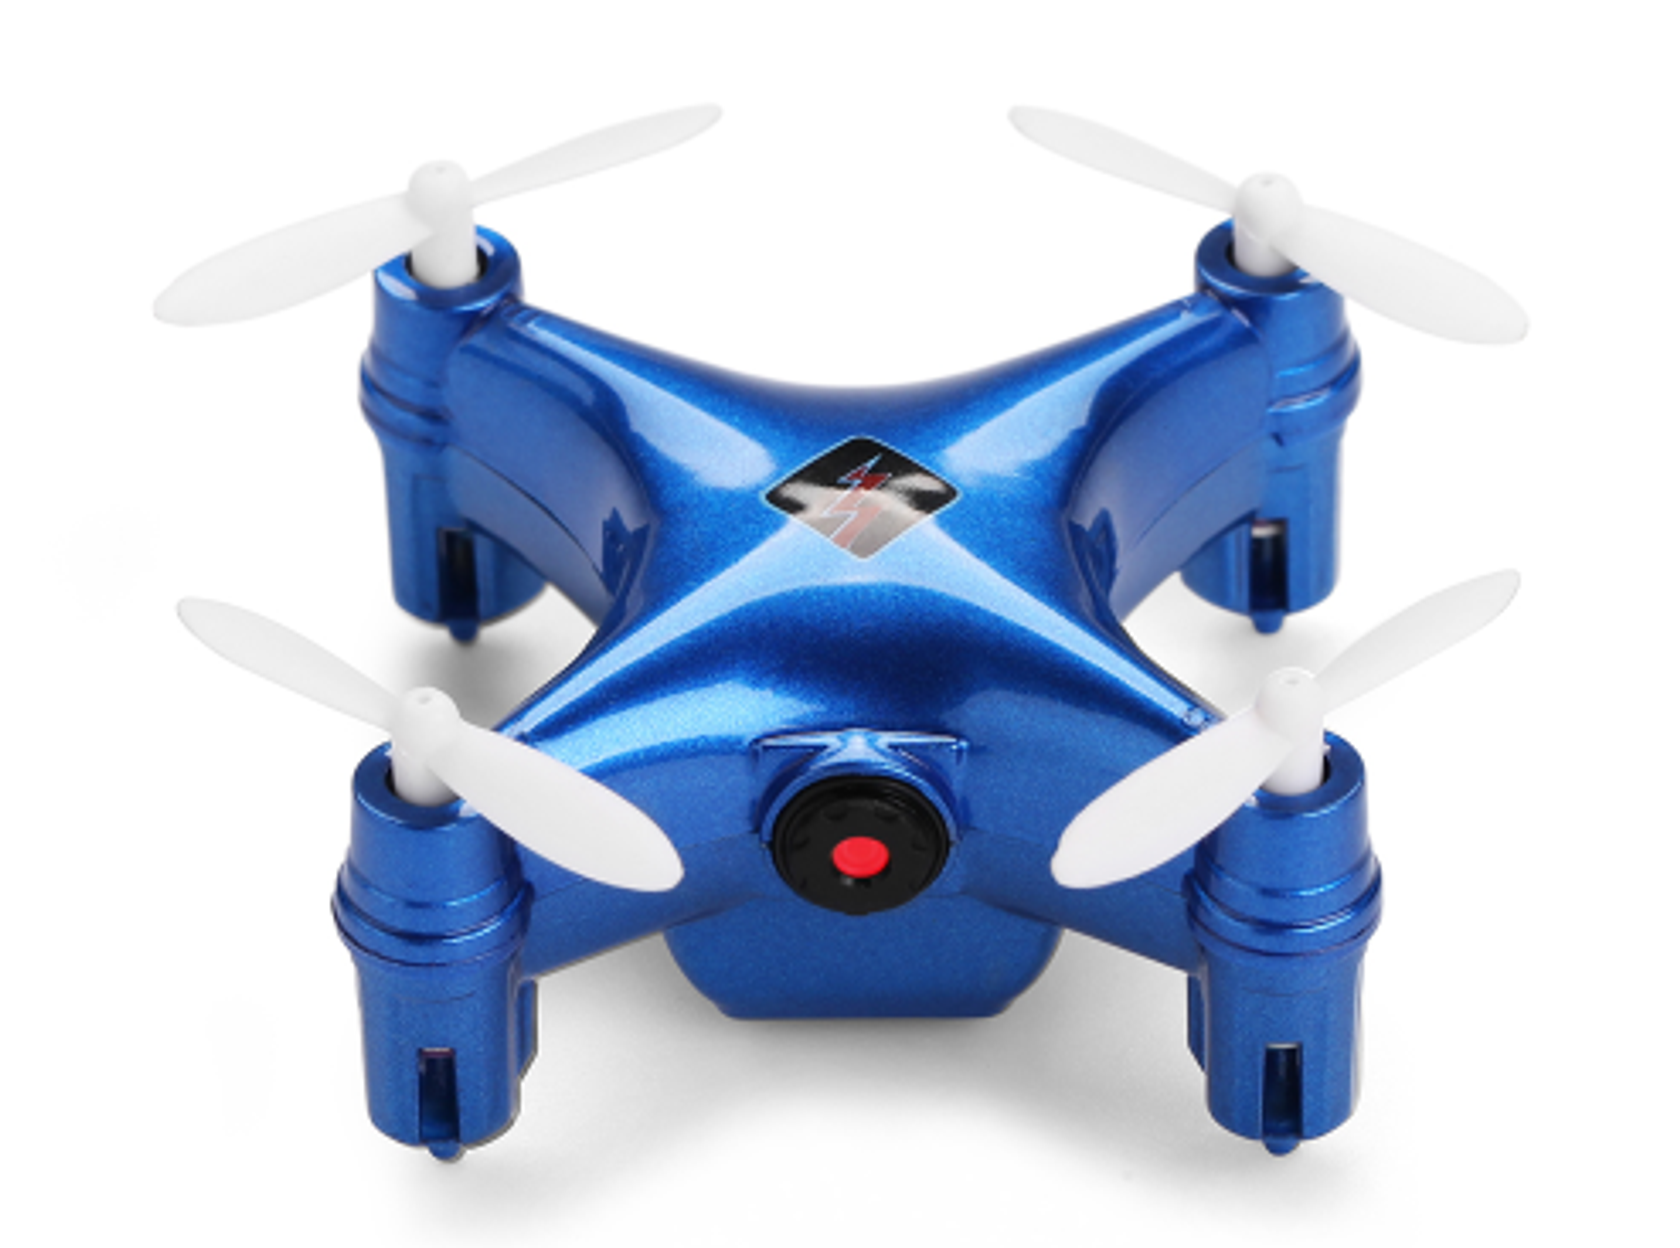 15 Top Drones Under 500 With Camera 2021. Best Drone Under 500 Dollars